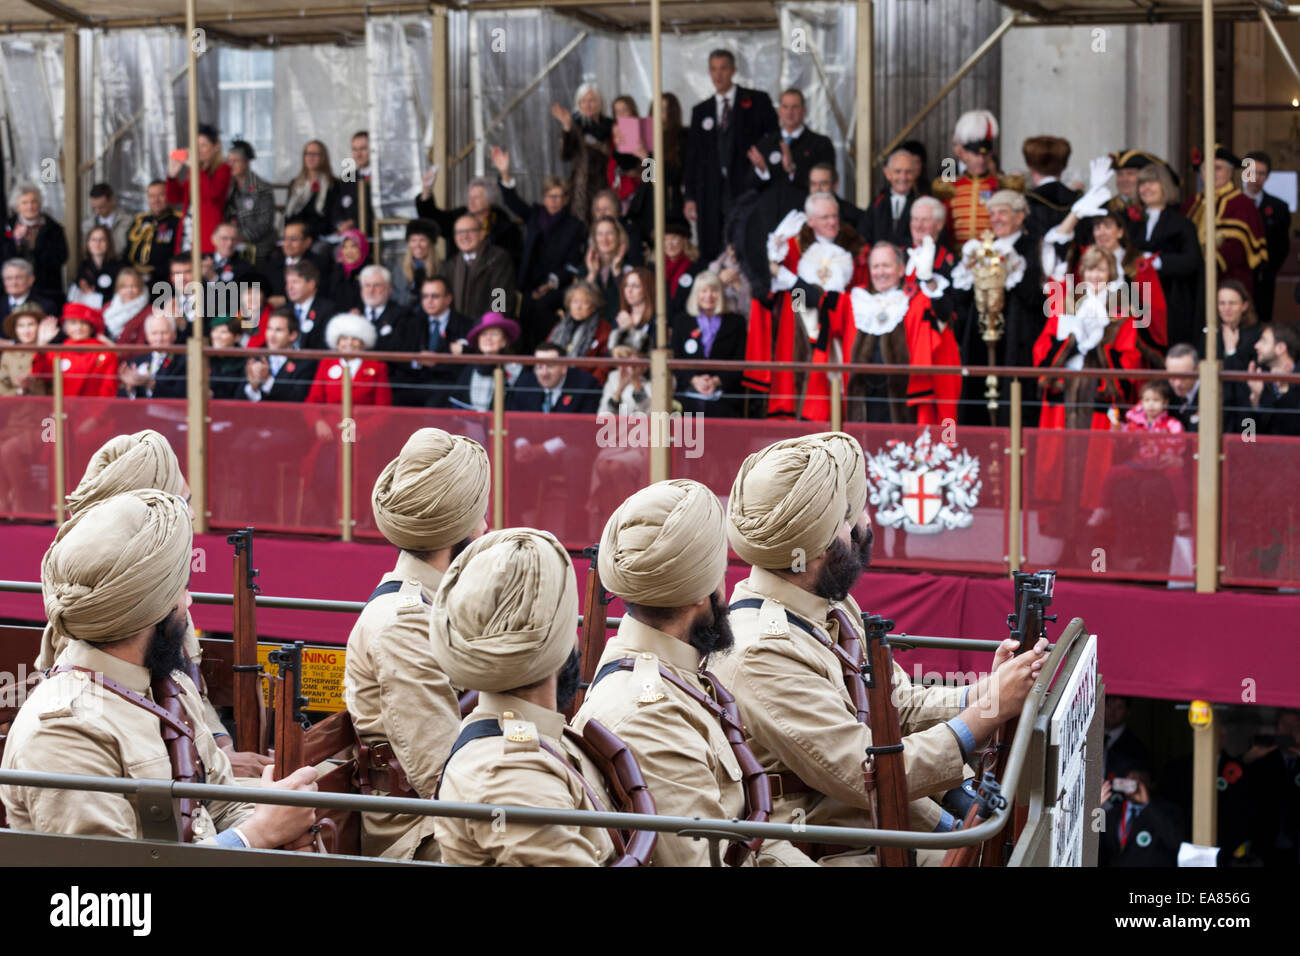 8th November 2014, Lord Mayor's Show, City of London, London, UK.  Members of the 15th Sikh Ludhiana Regiment take part in the procession. The Lord Mayor's Show is the oldest civil procession in the world, it celebrates the start of a one-year term for the new Mayor of the City of London. Stock Photo